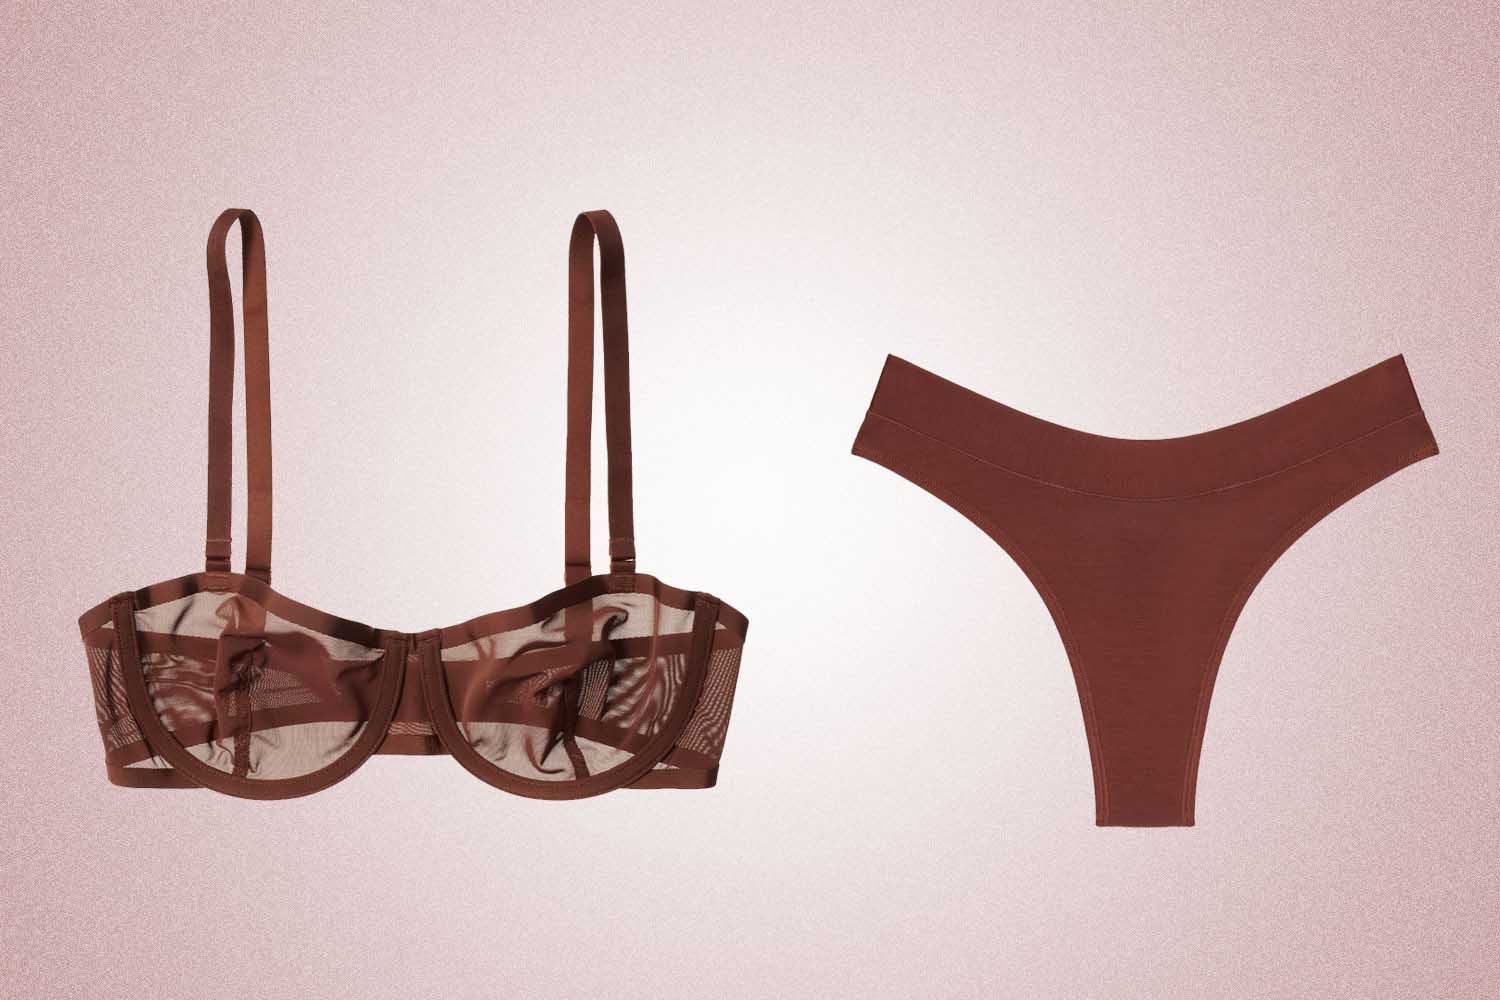 A brown mesh balconette style bra and brown thong, a perfect Valentine's Day gift, on a pink background. 